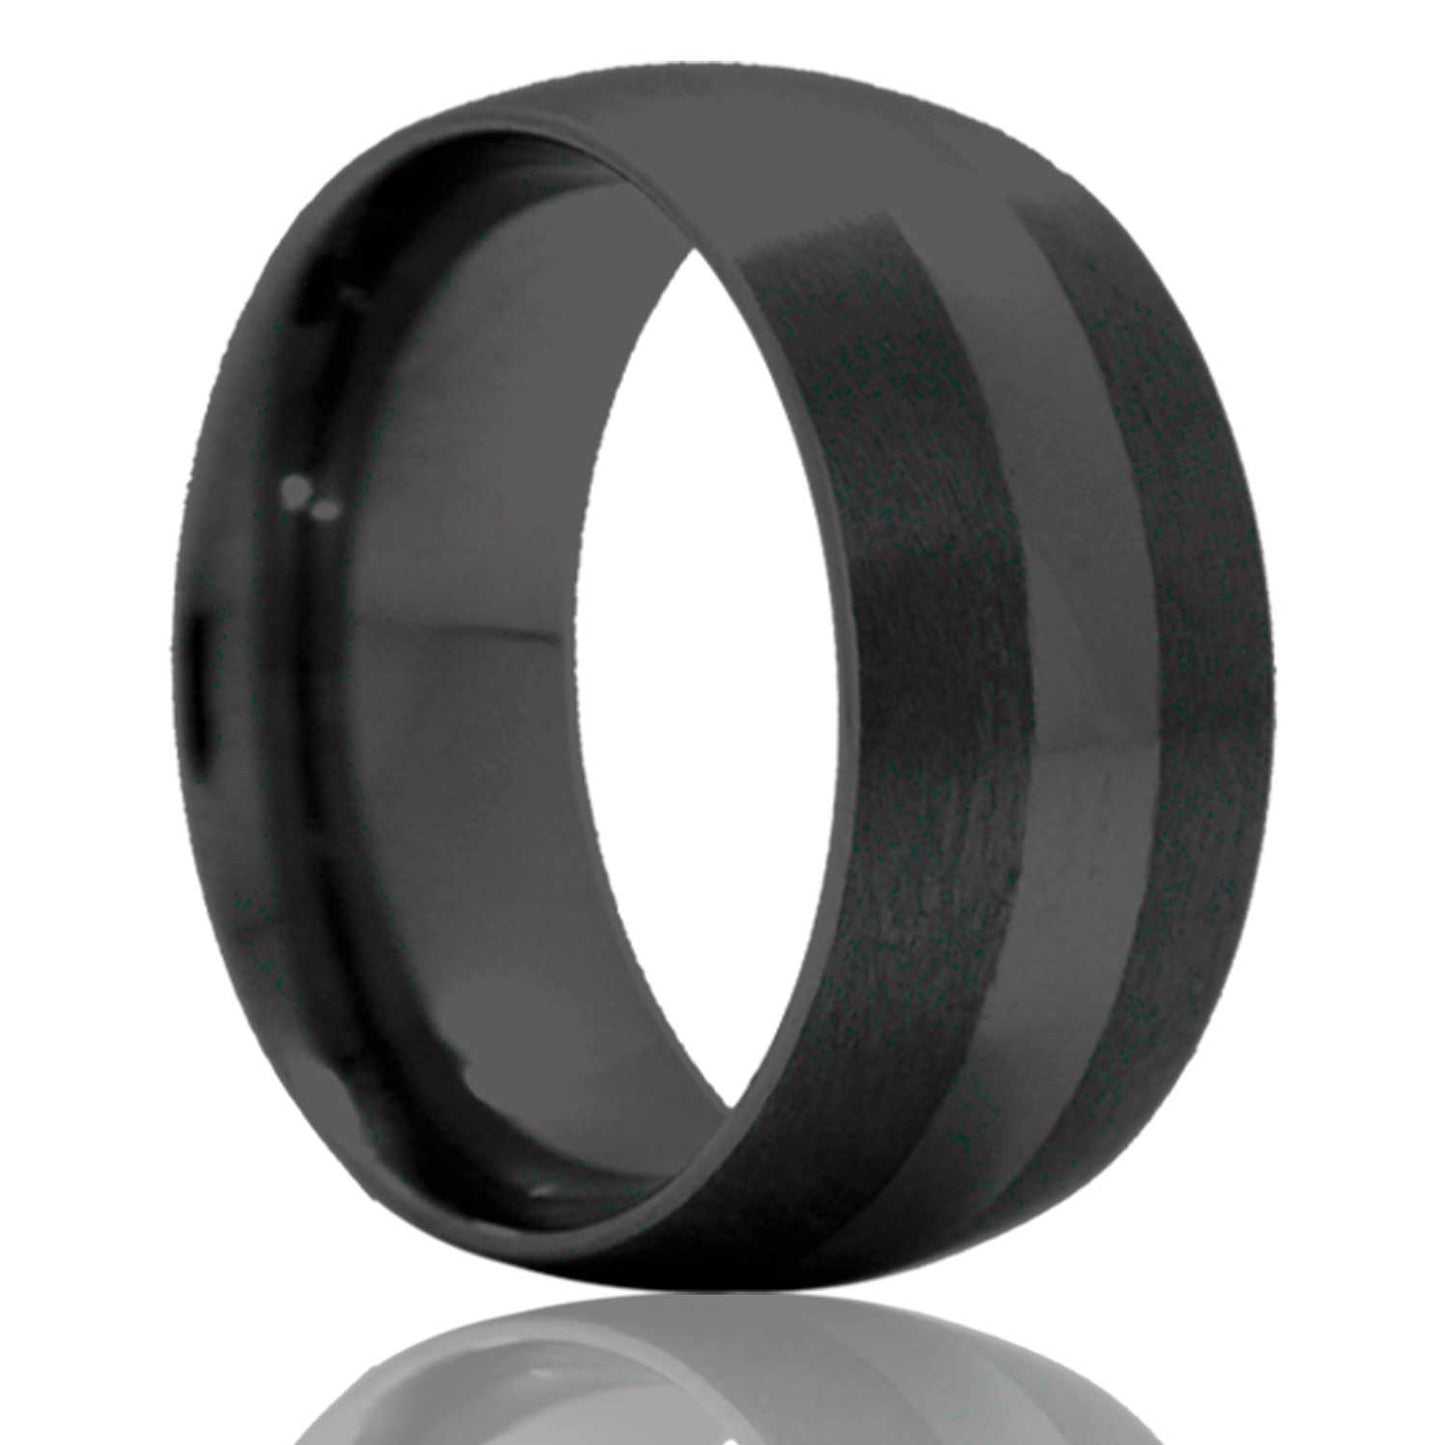 A domed black ceramic wedding band with satin finish stripe displayed on a neutral white background.